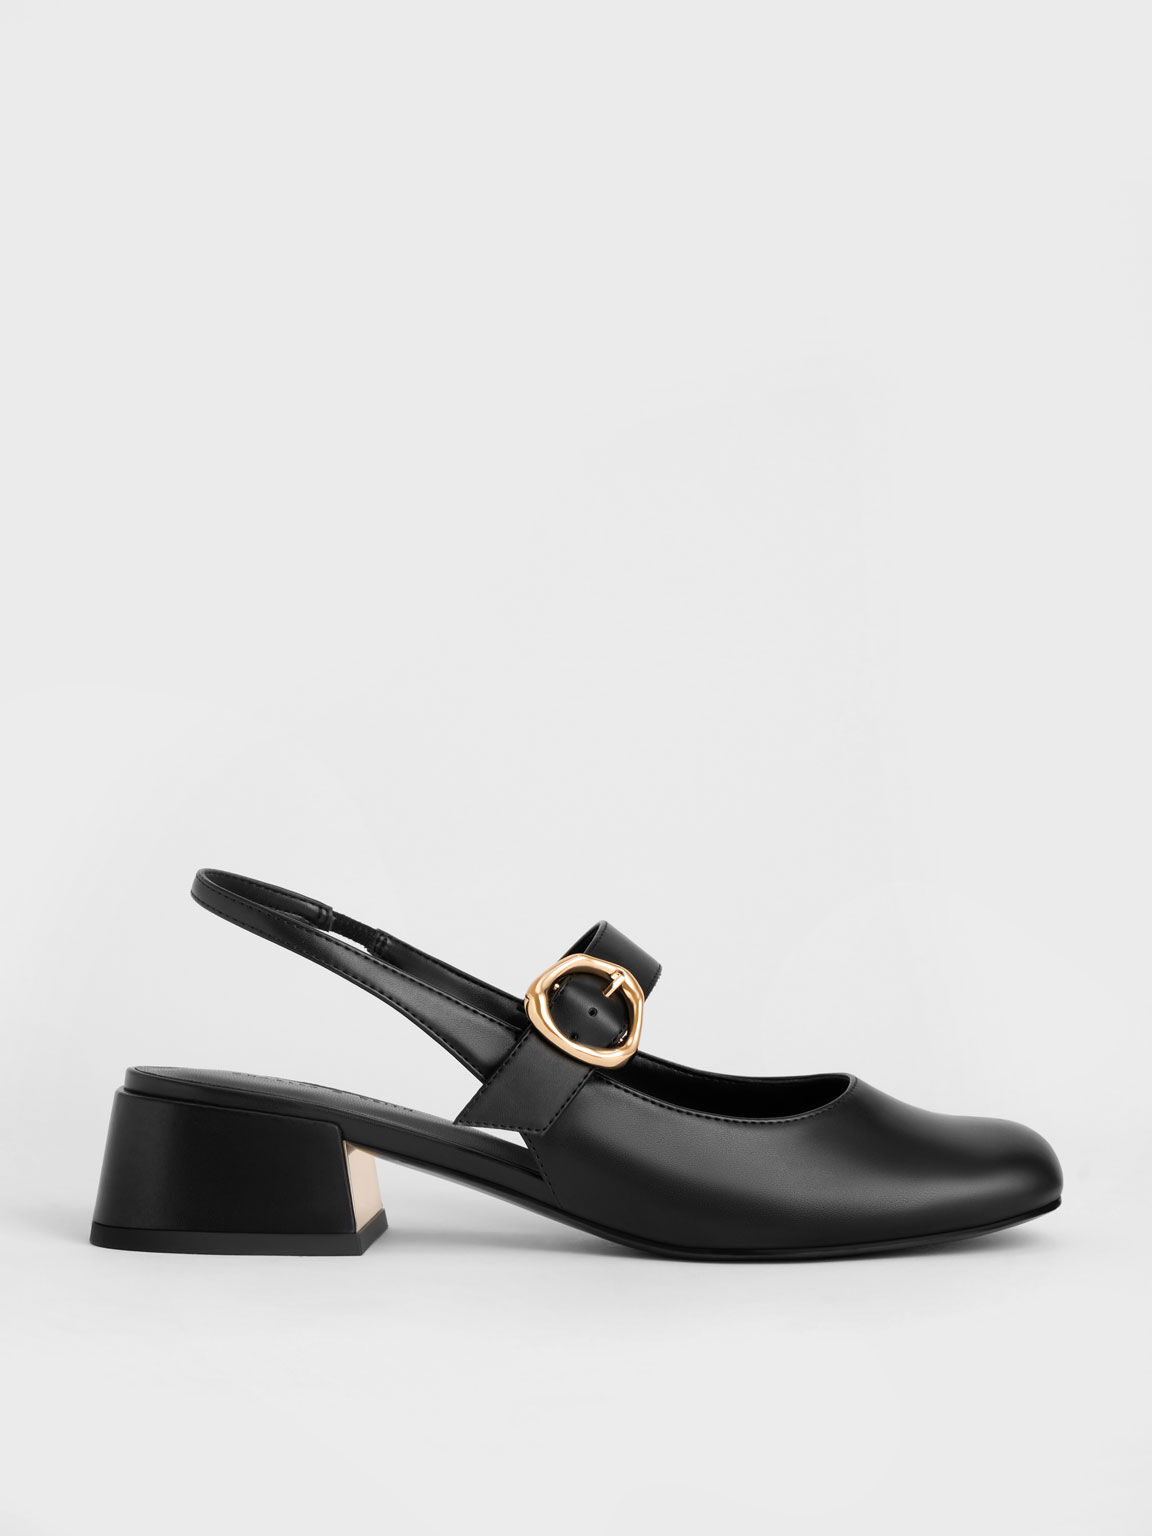 Charles & Keith Square Toe Slingback Pumps in Black | Lyst